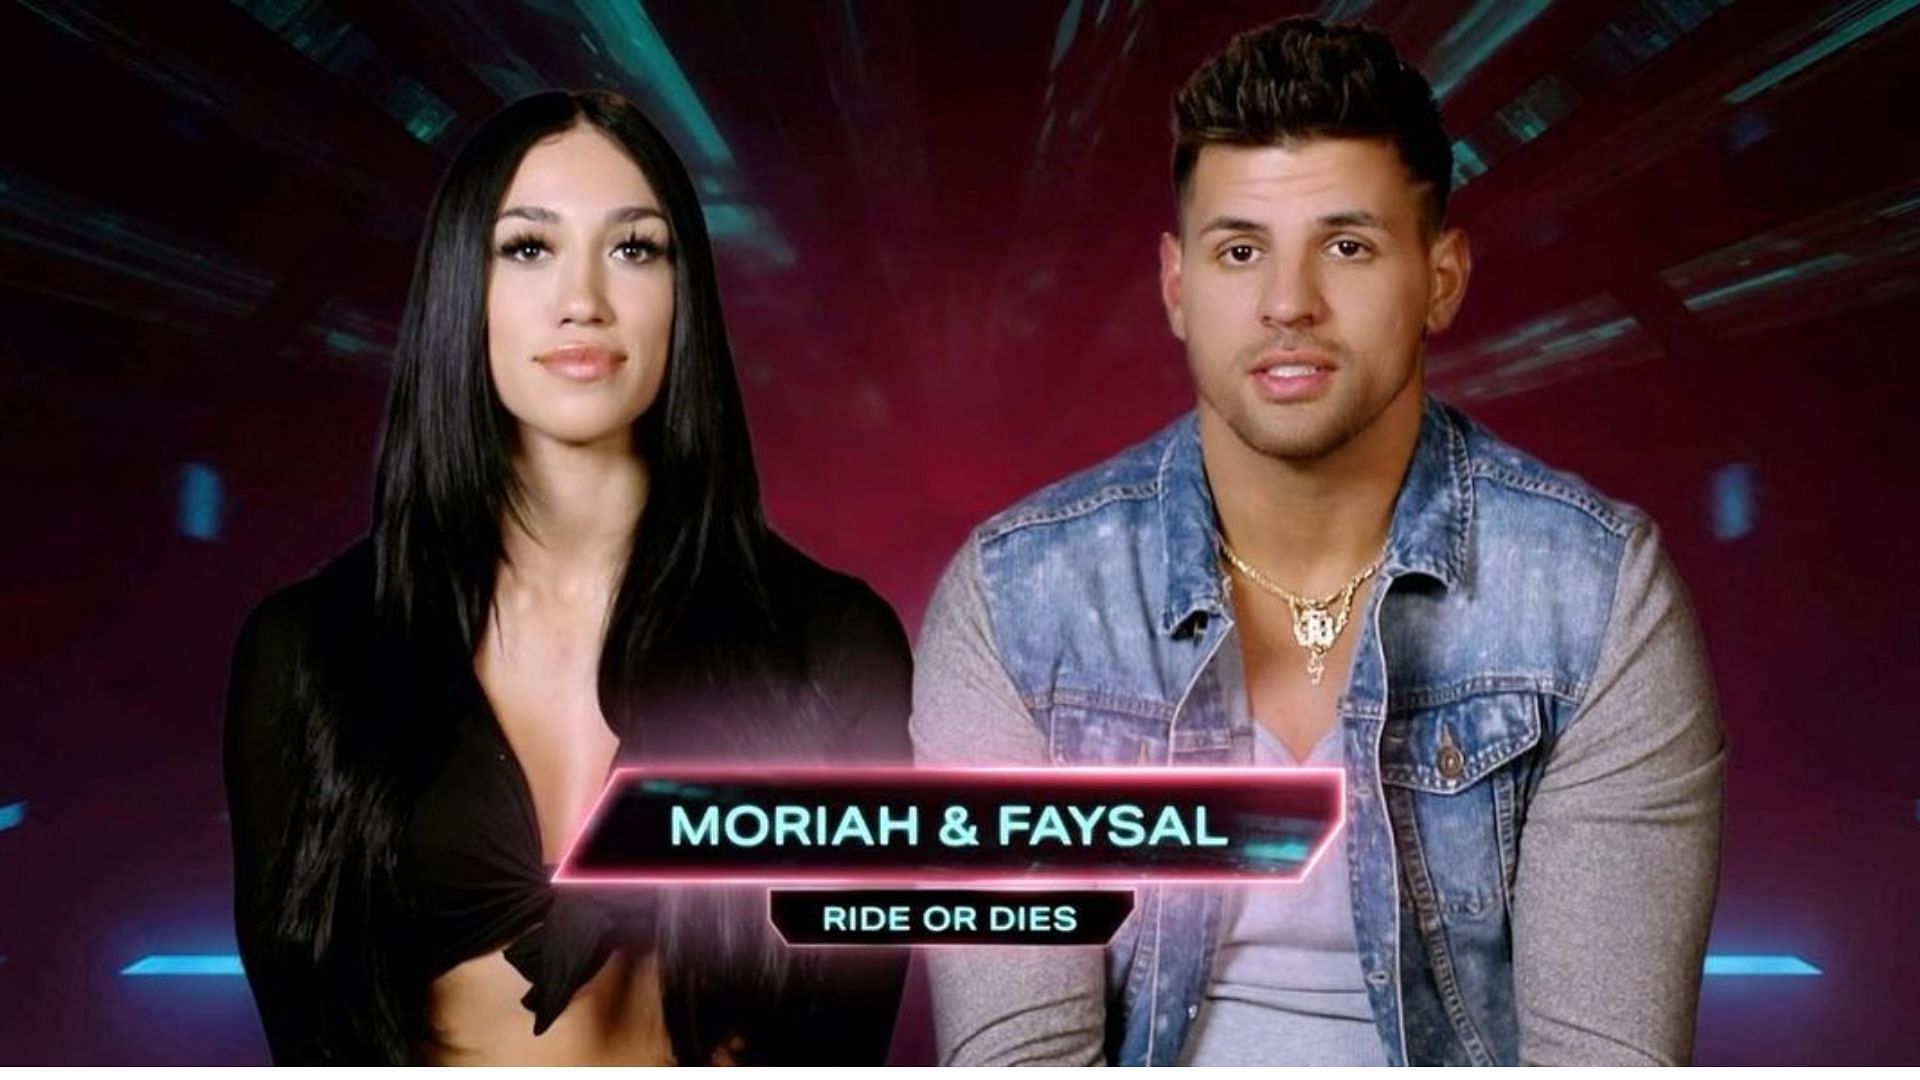 Friends Fessy and Moriah to compete on The Challenge Season 38 airing Wednesday (Image via moriahjadea/Instagram)